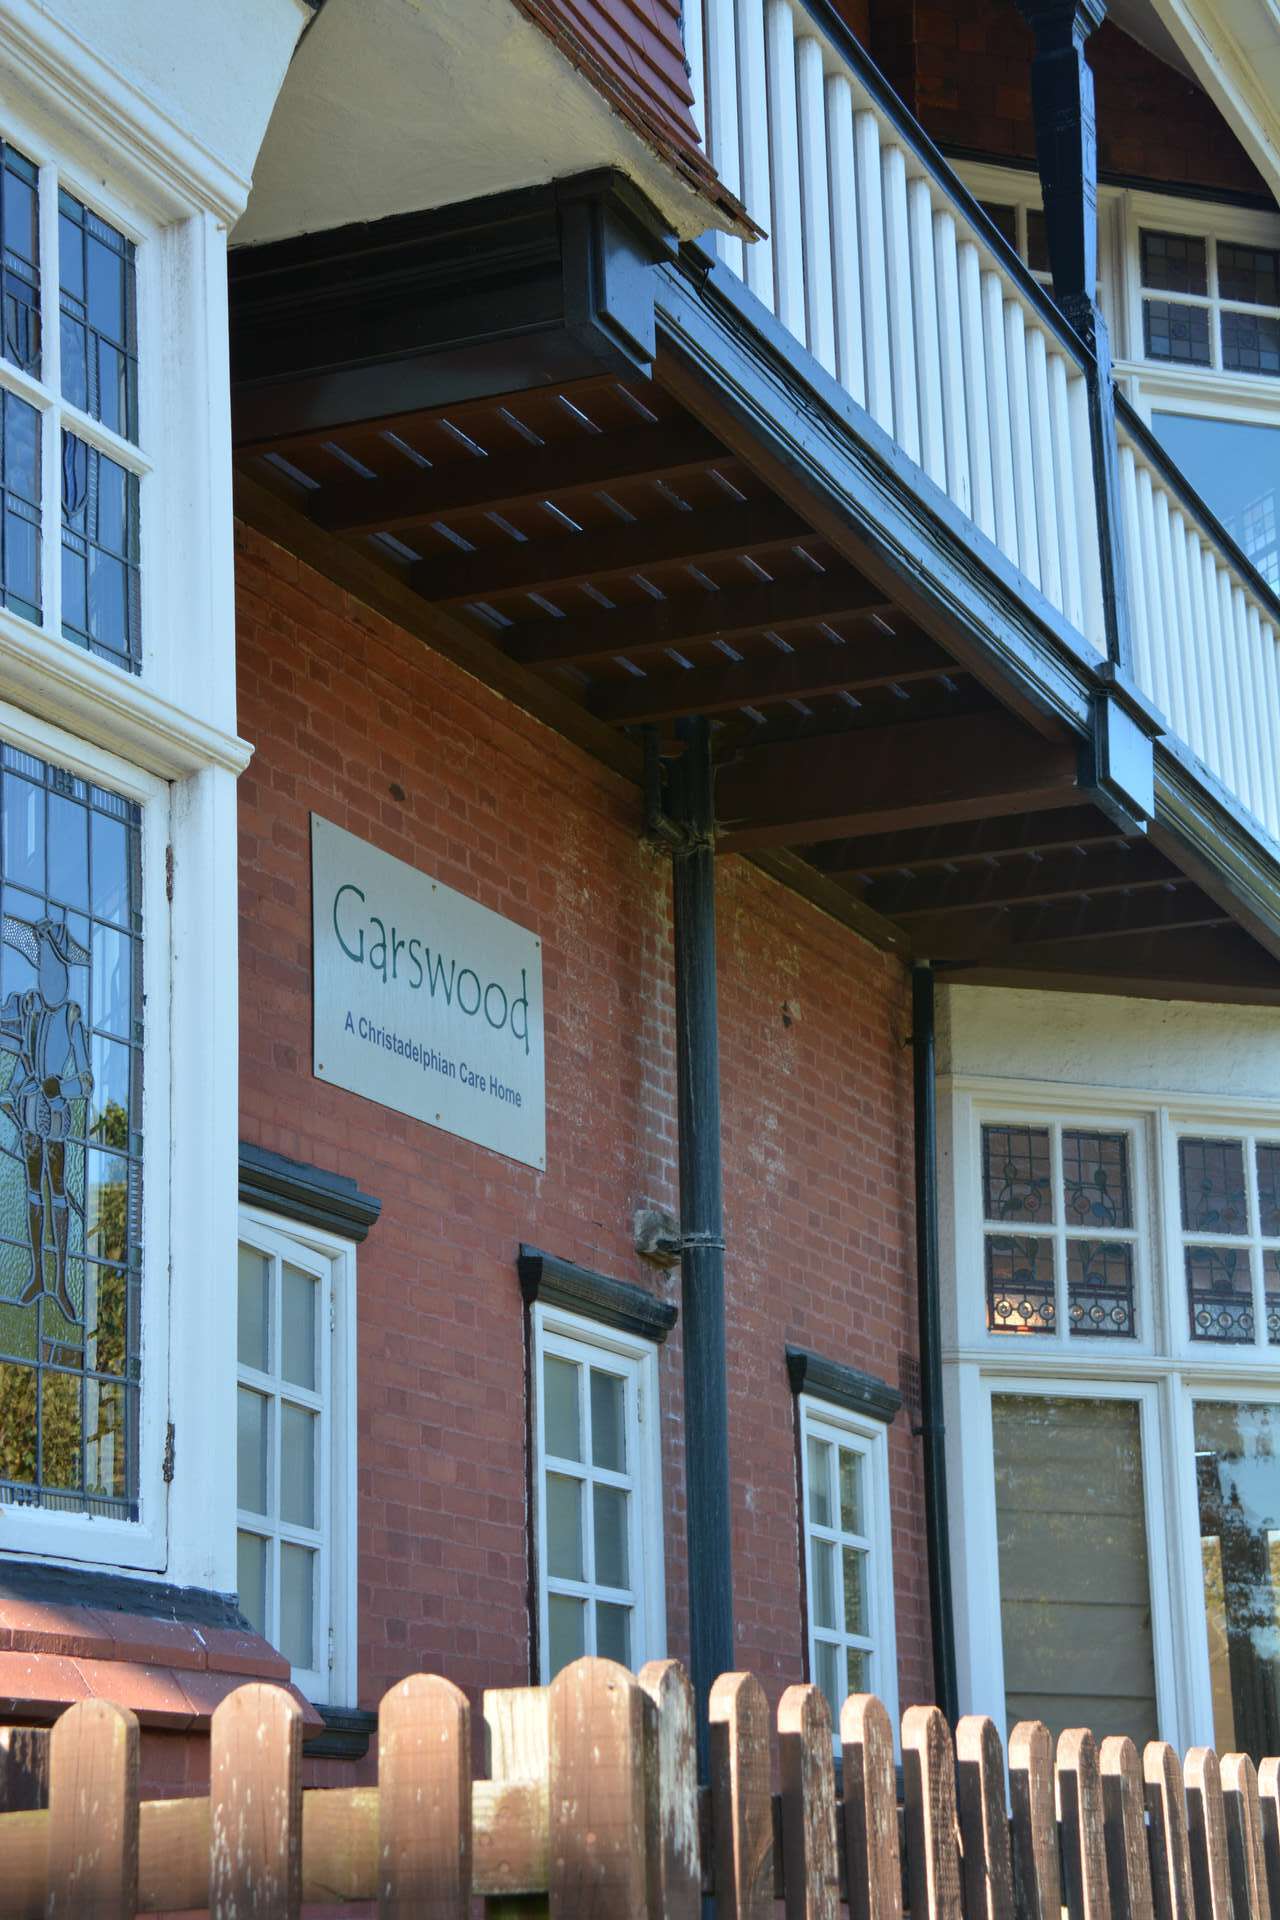 CCH Image displaying the signage at garswood